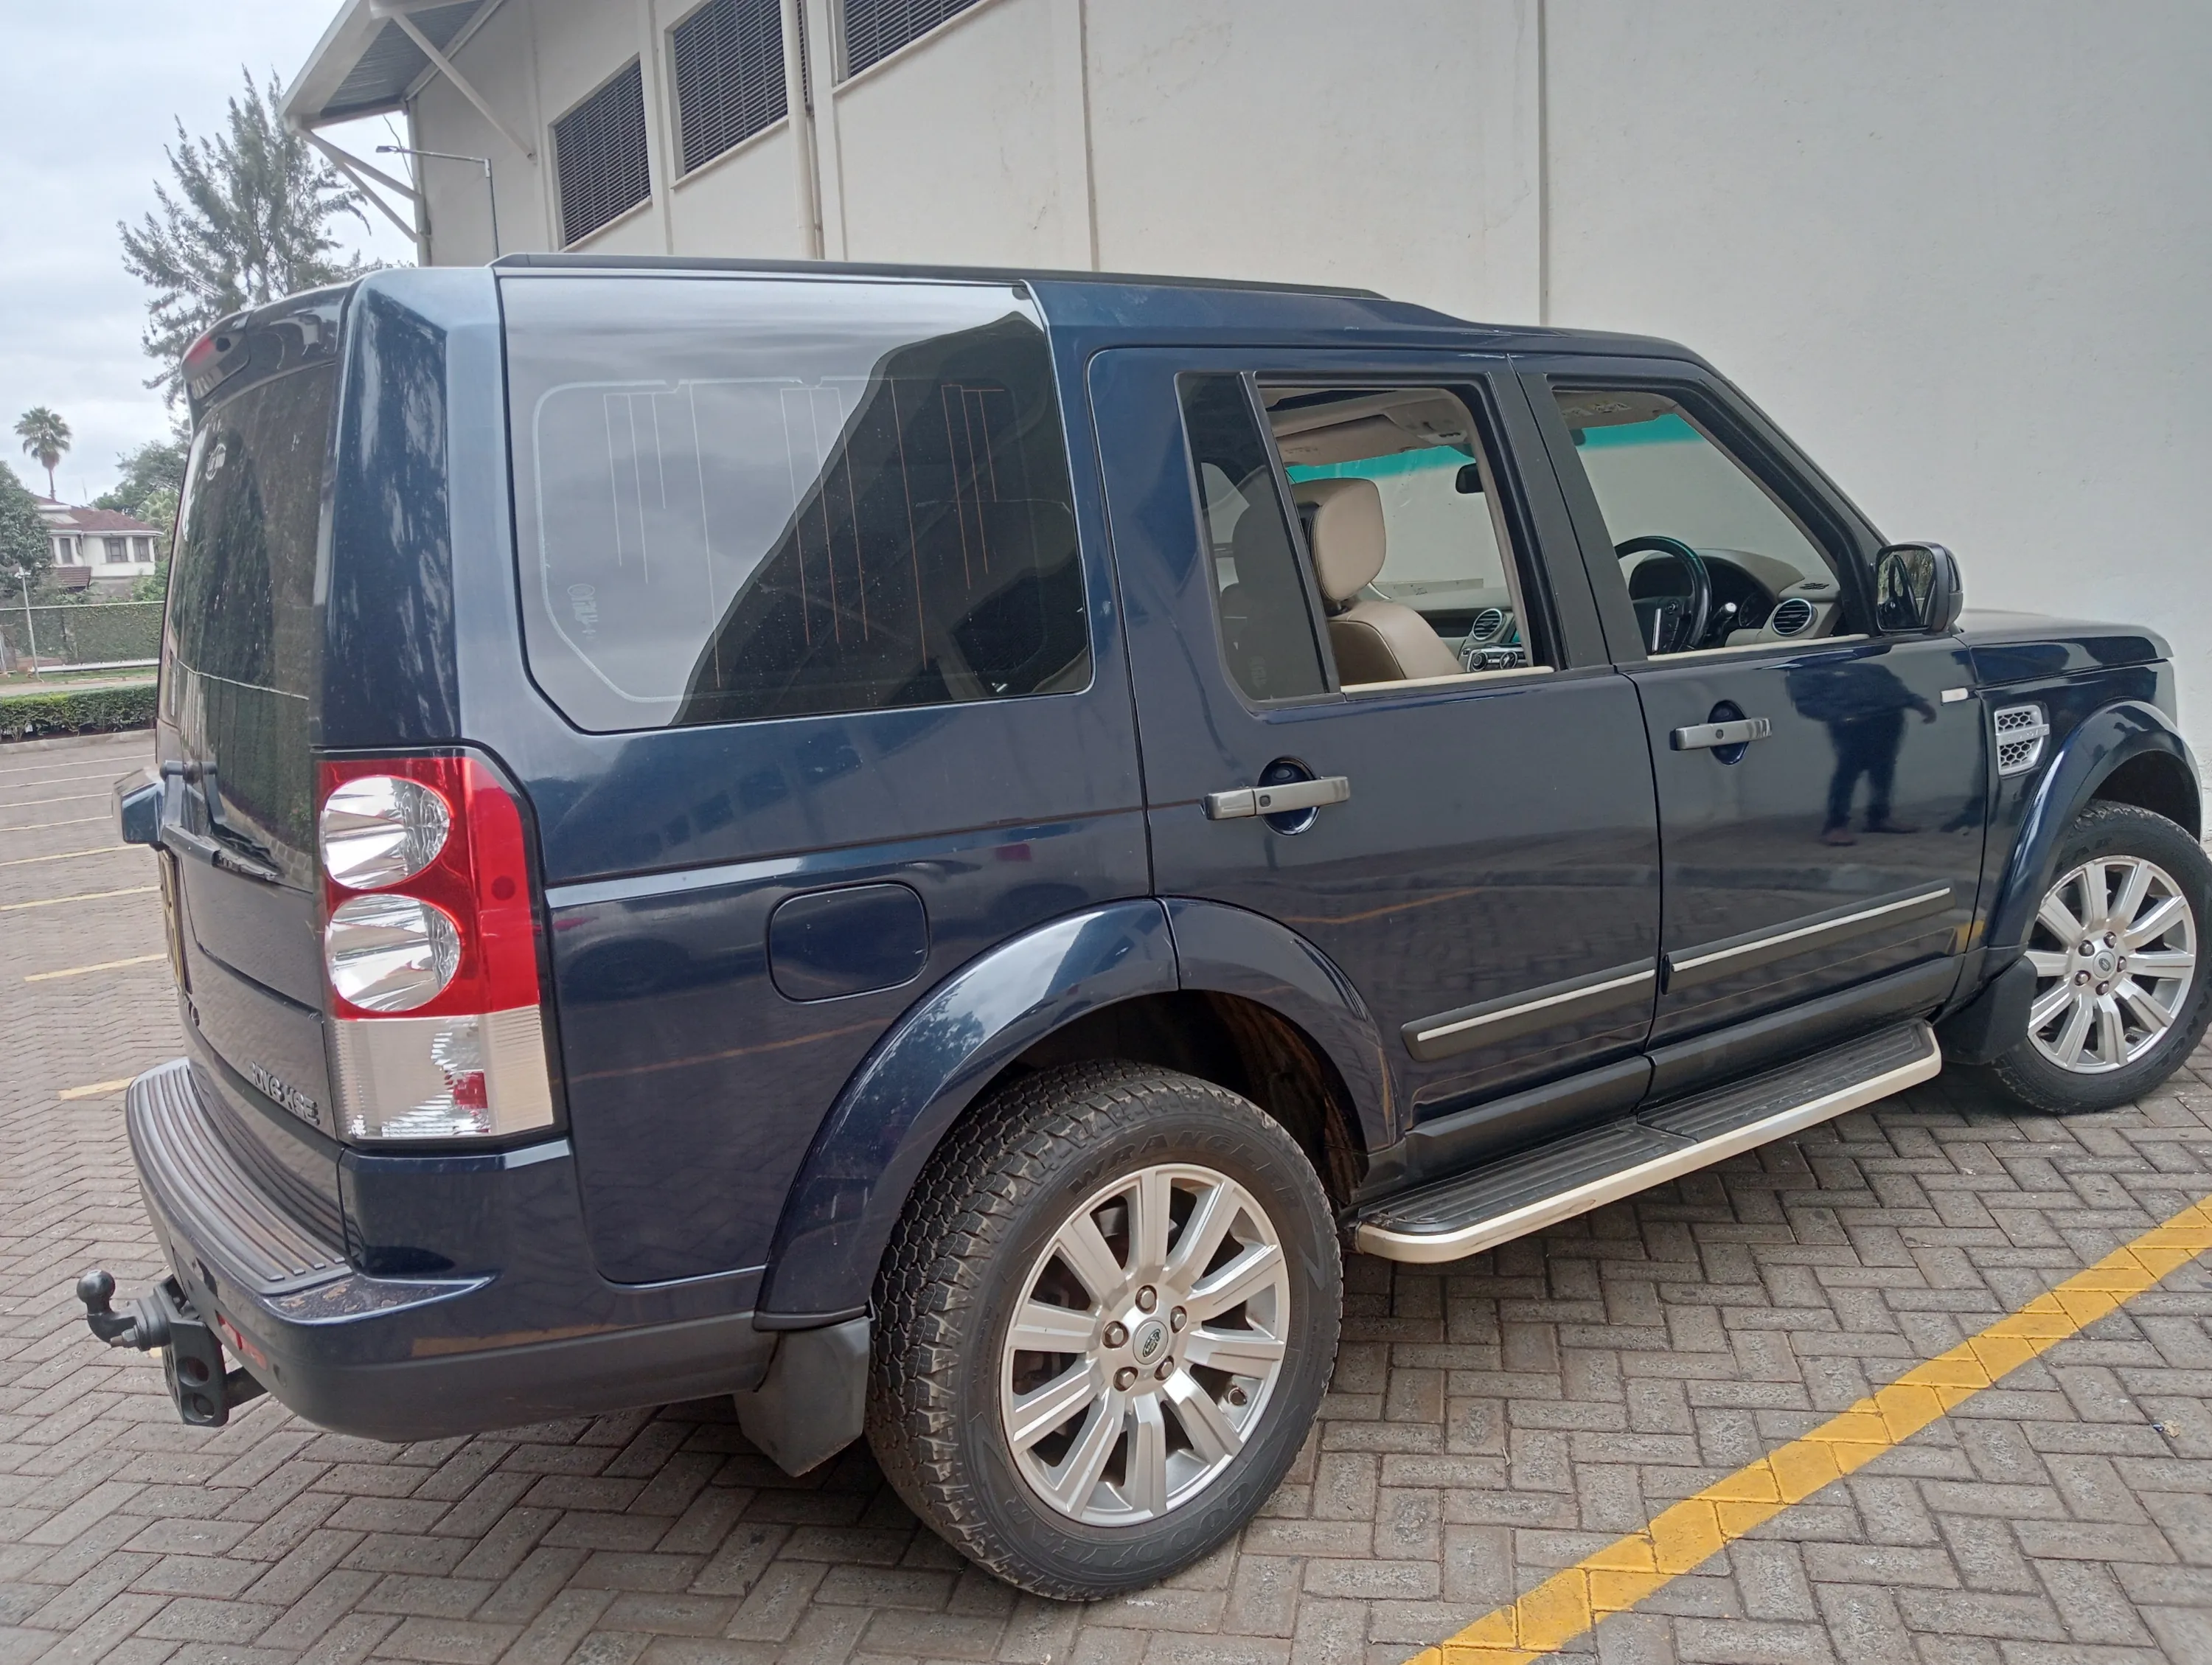 2012 Discovery 4 HSE pay 50% deposit New cheap offer